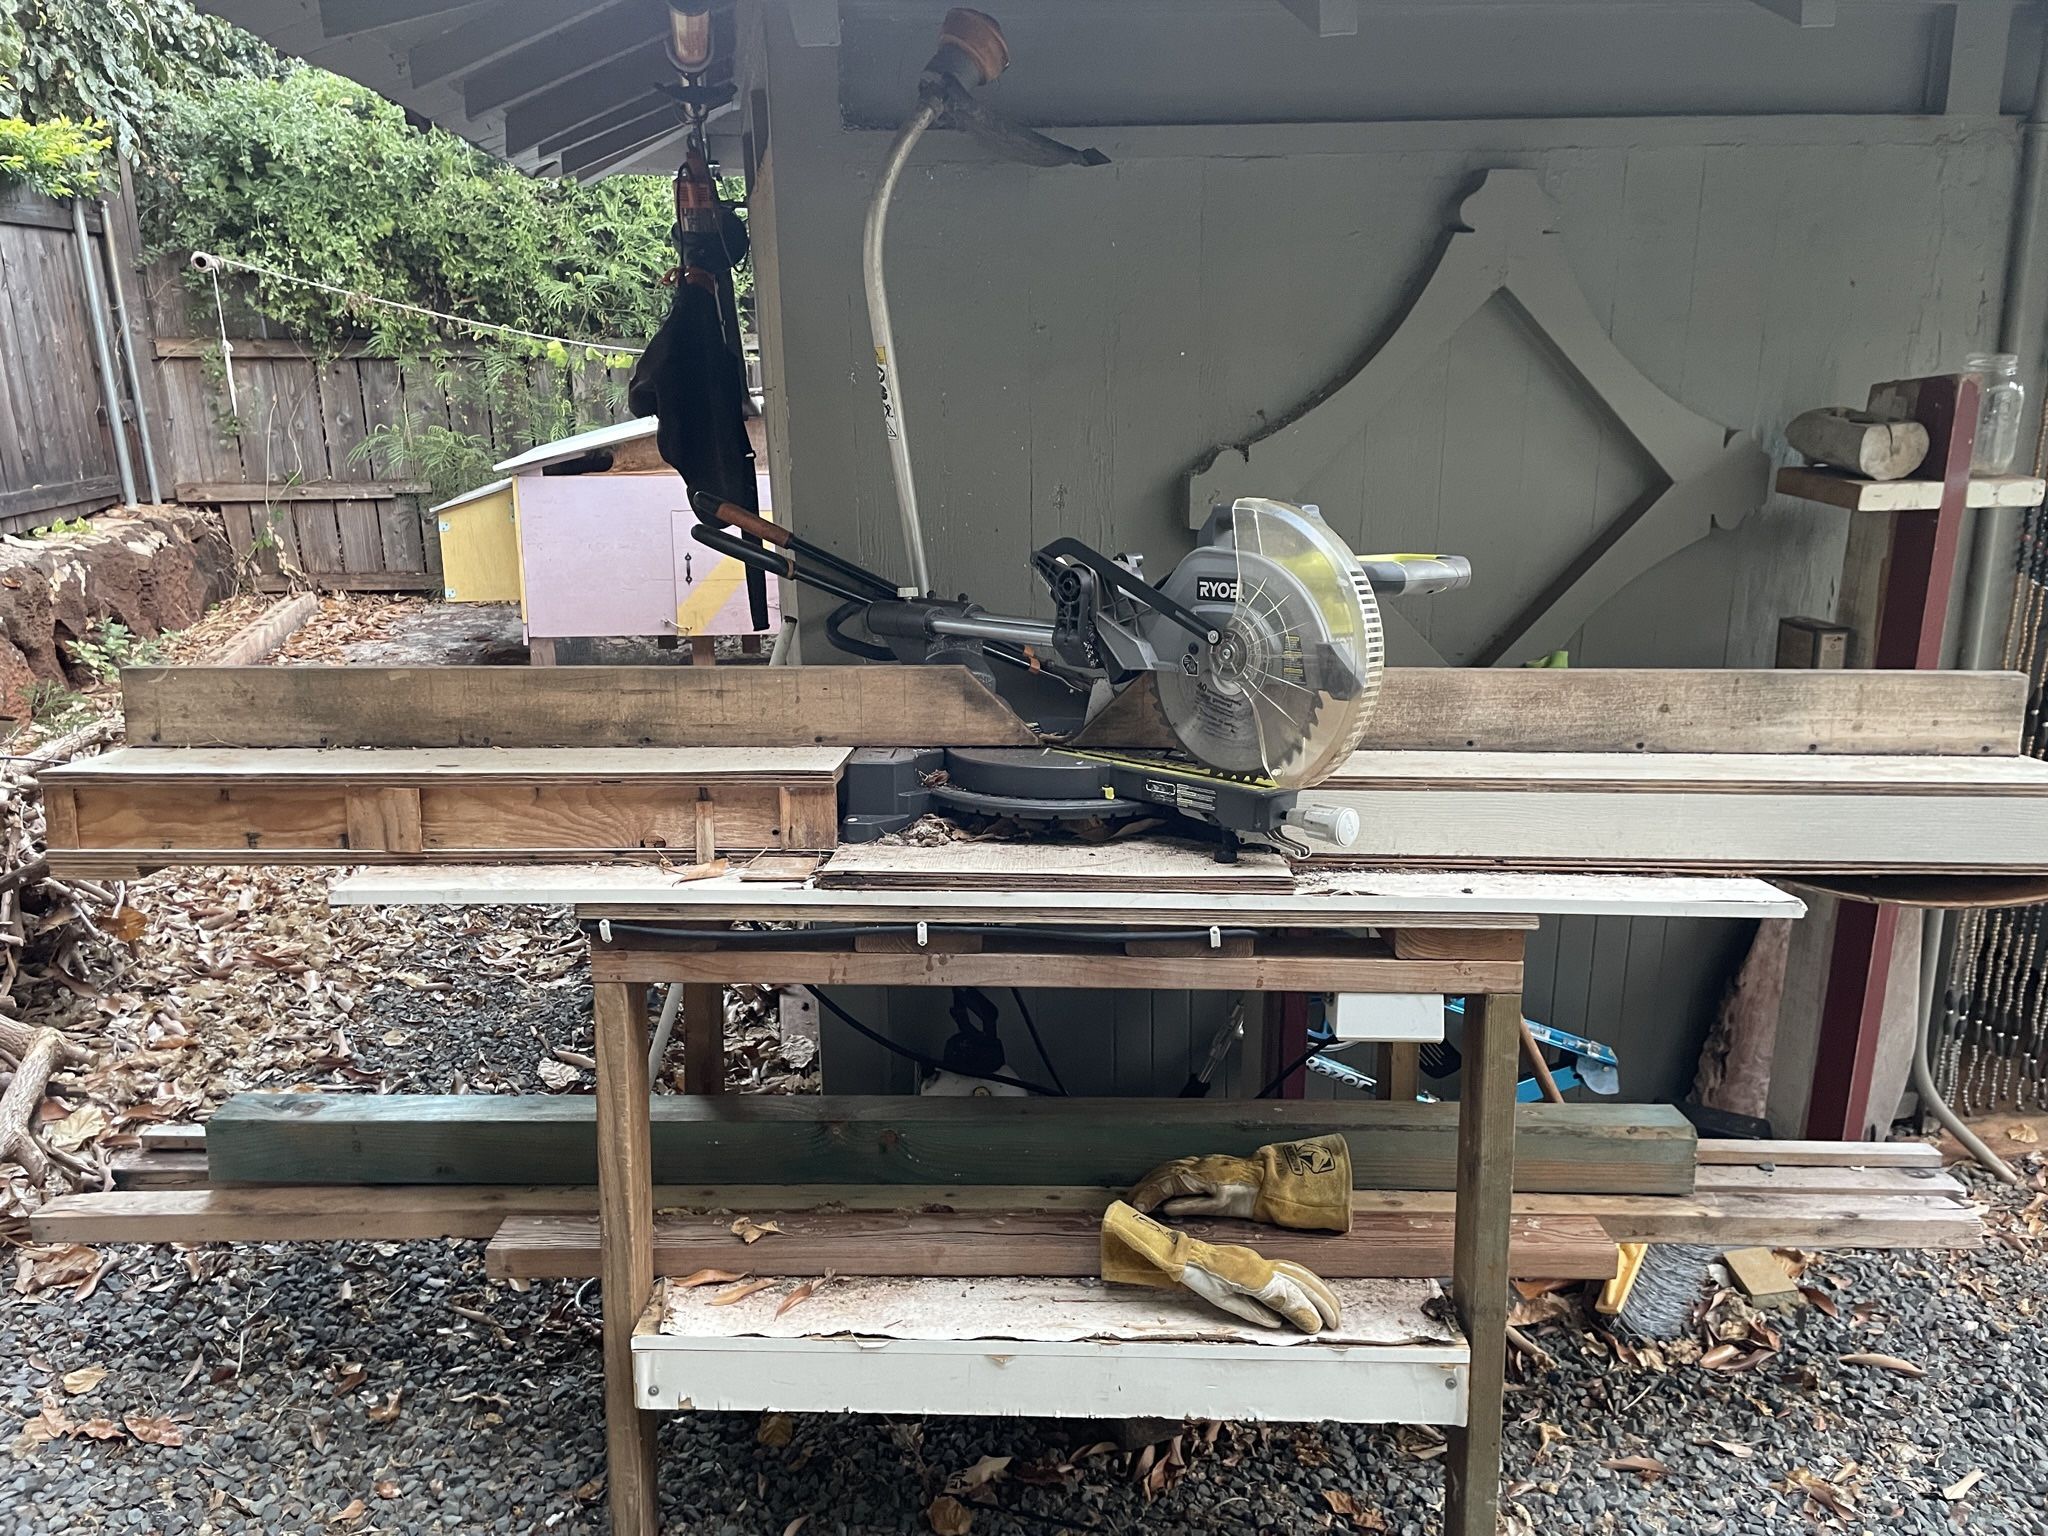 Ryobi Sliding Miter Saw W/built In Infeed Outfeed Table